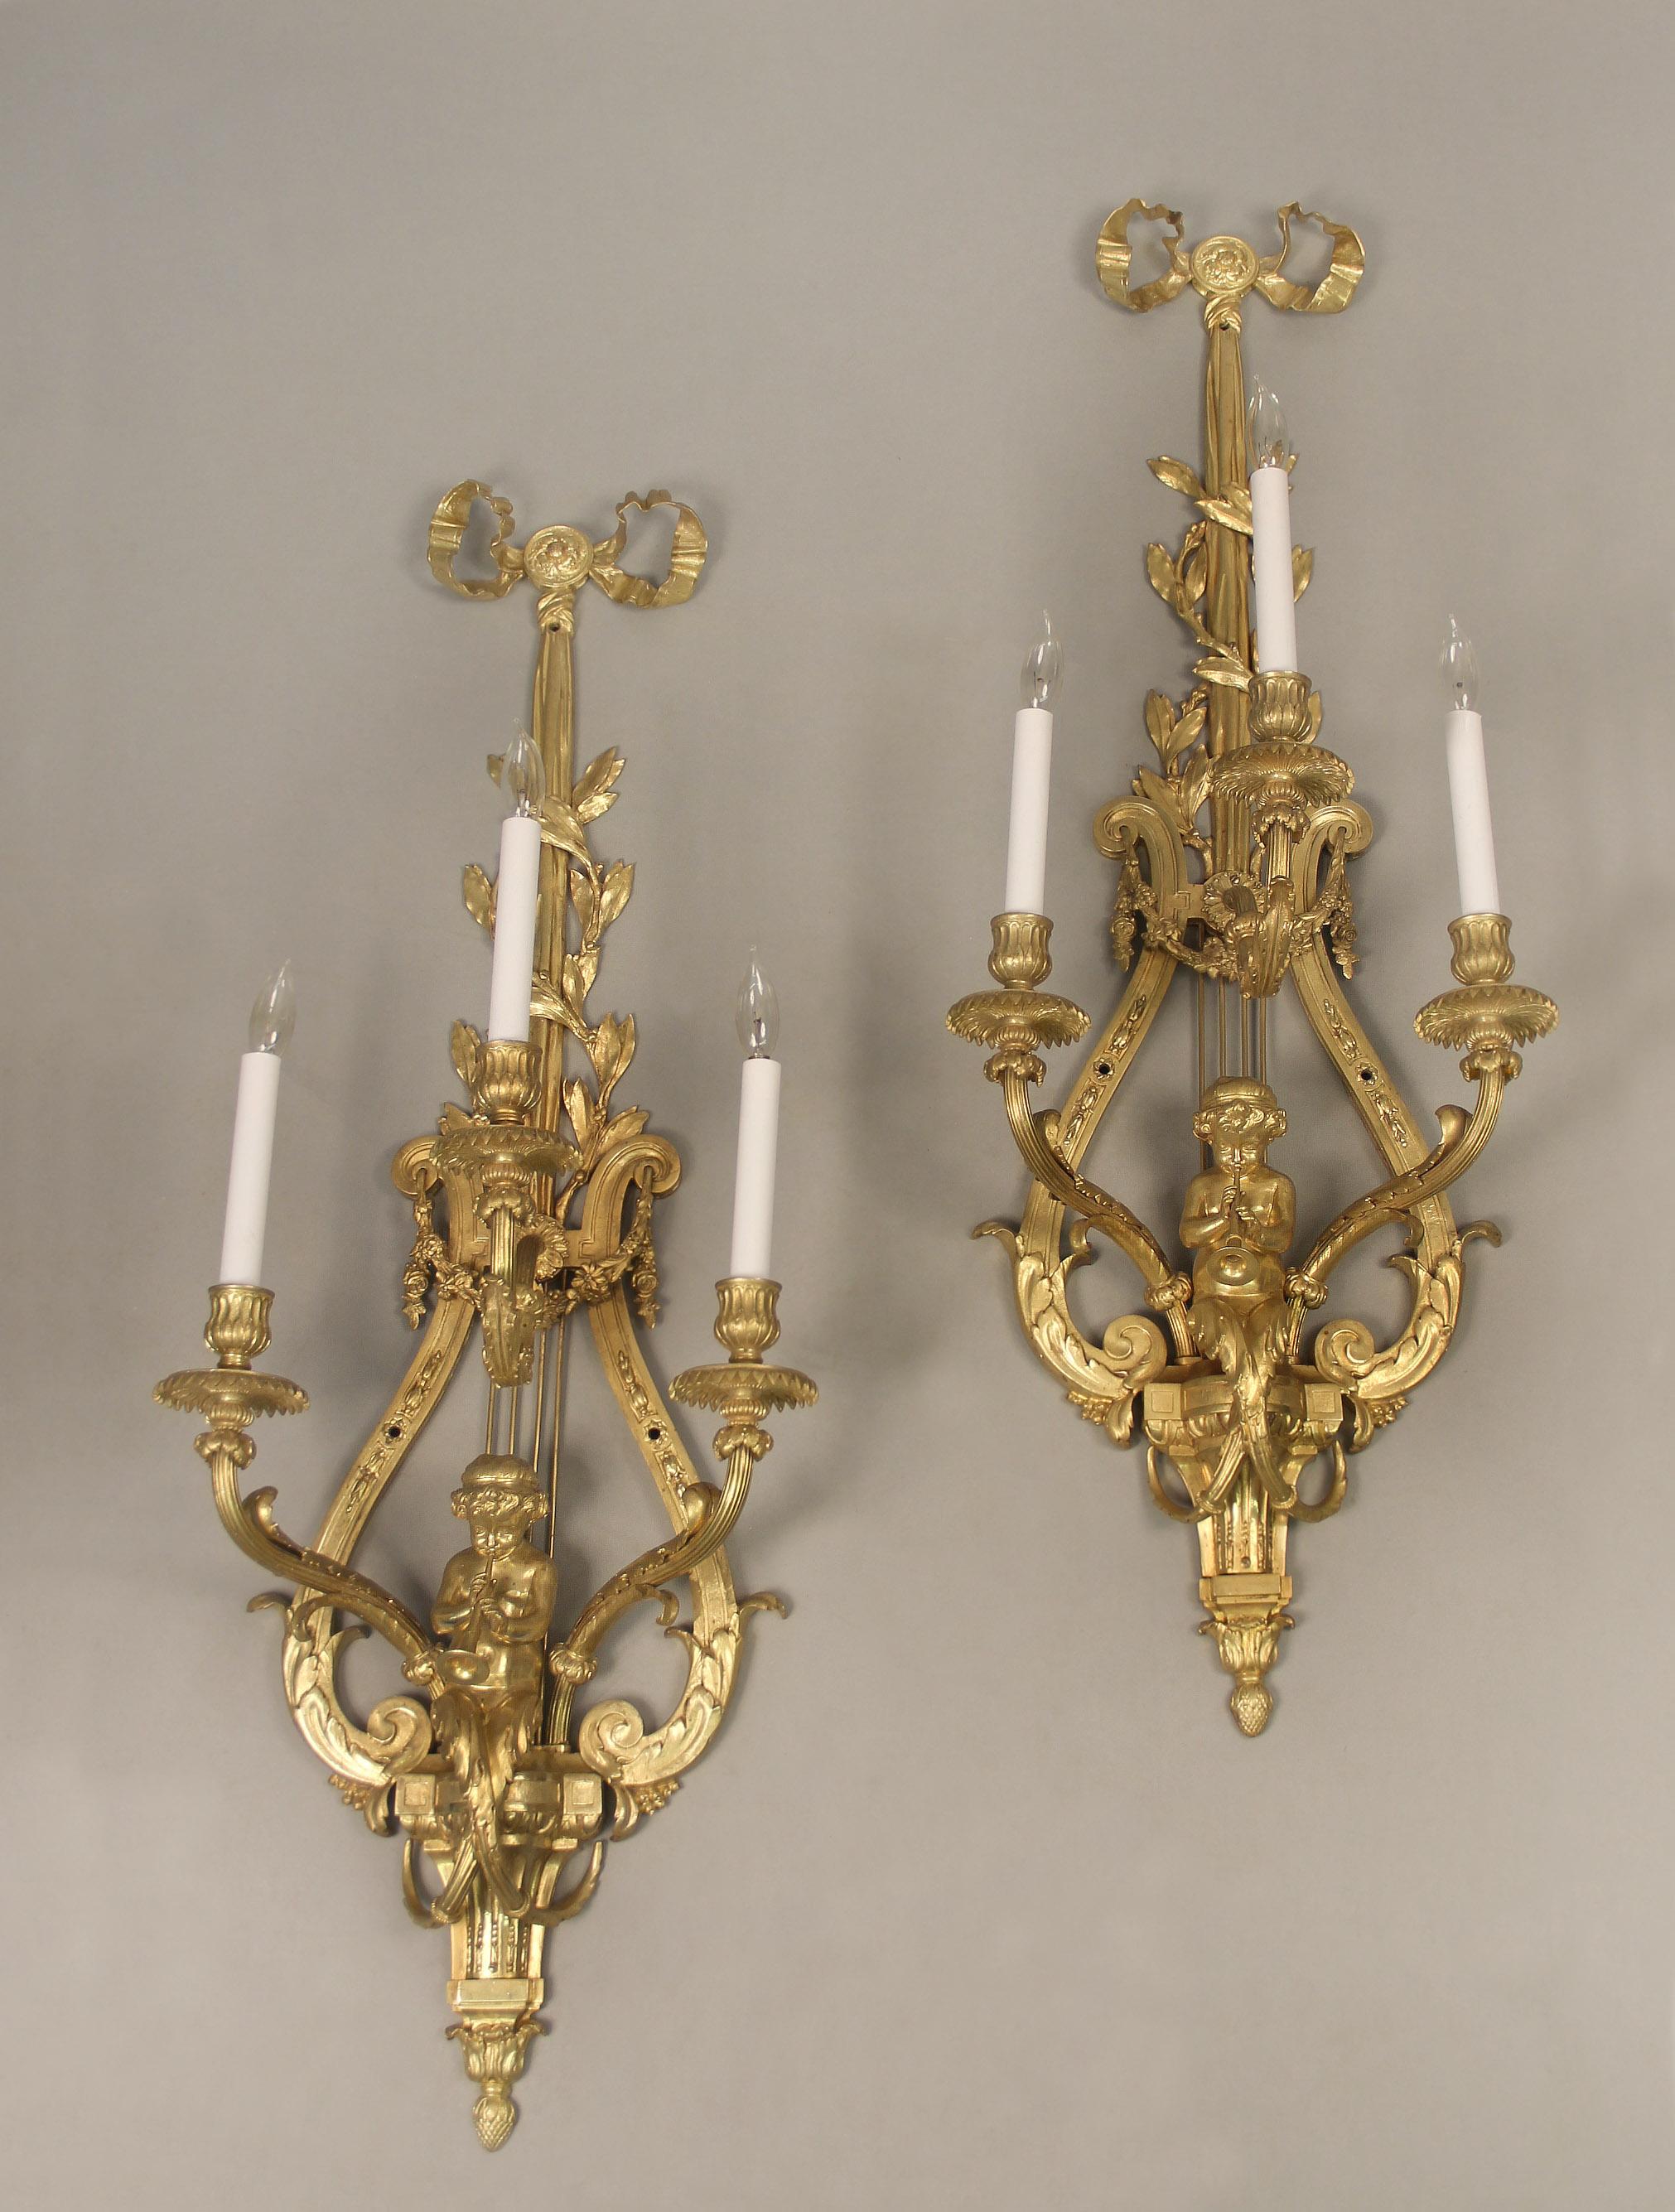 A wonderful pair of late 19th century gilt bronze three light cherub sconces

Each with ribbon-tied top above a lyre form backplate with swags of flowers, three foliate scrolling candelabra arms, centered by a large trumpet playing putti, leading